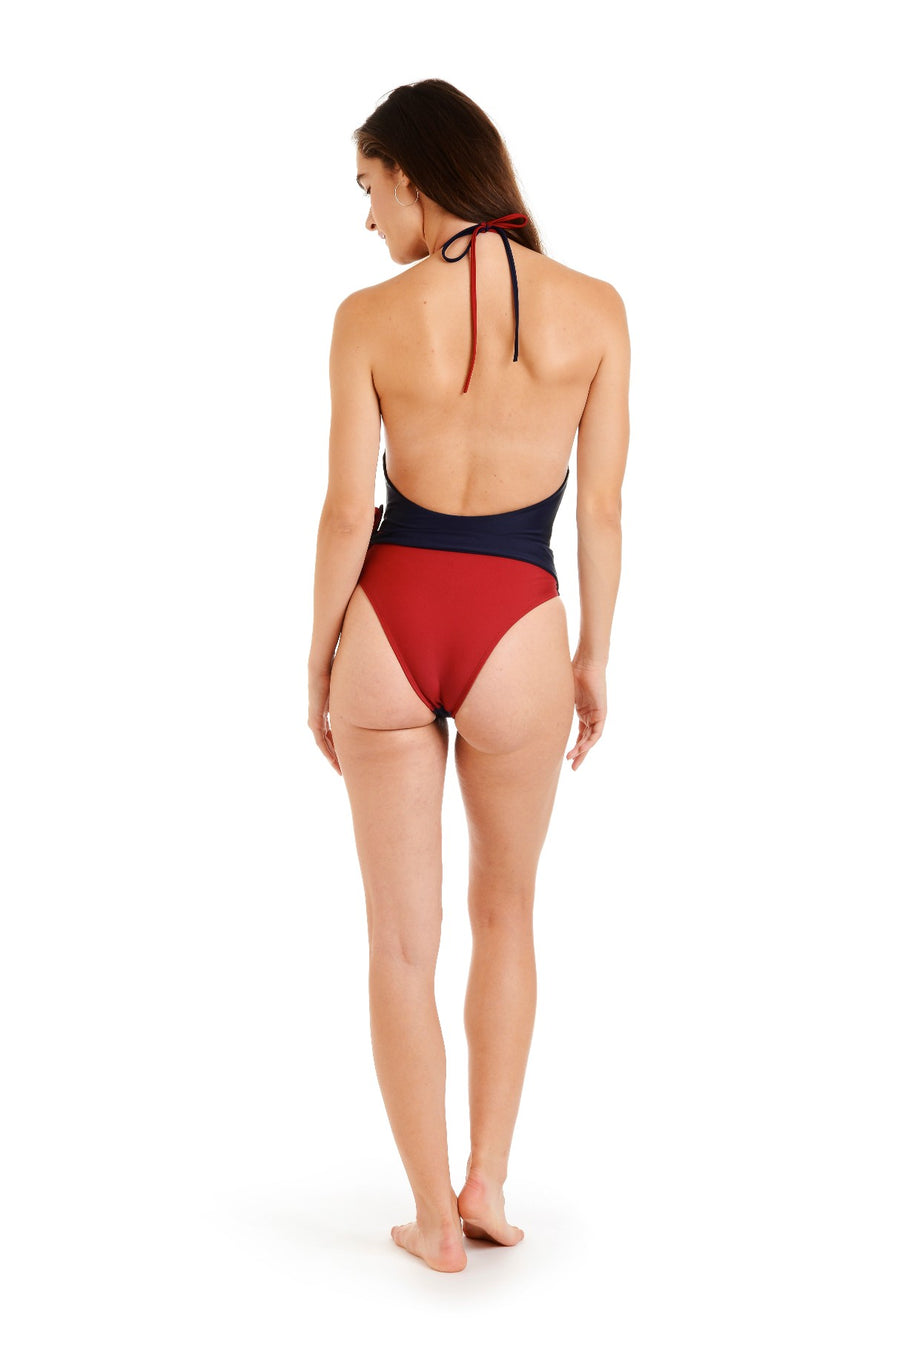 Back view of woman in a navy & red one piece swimsuit”